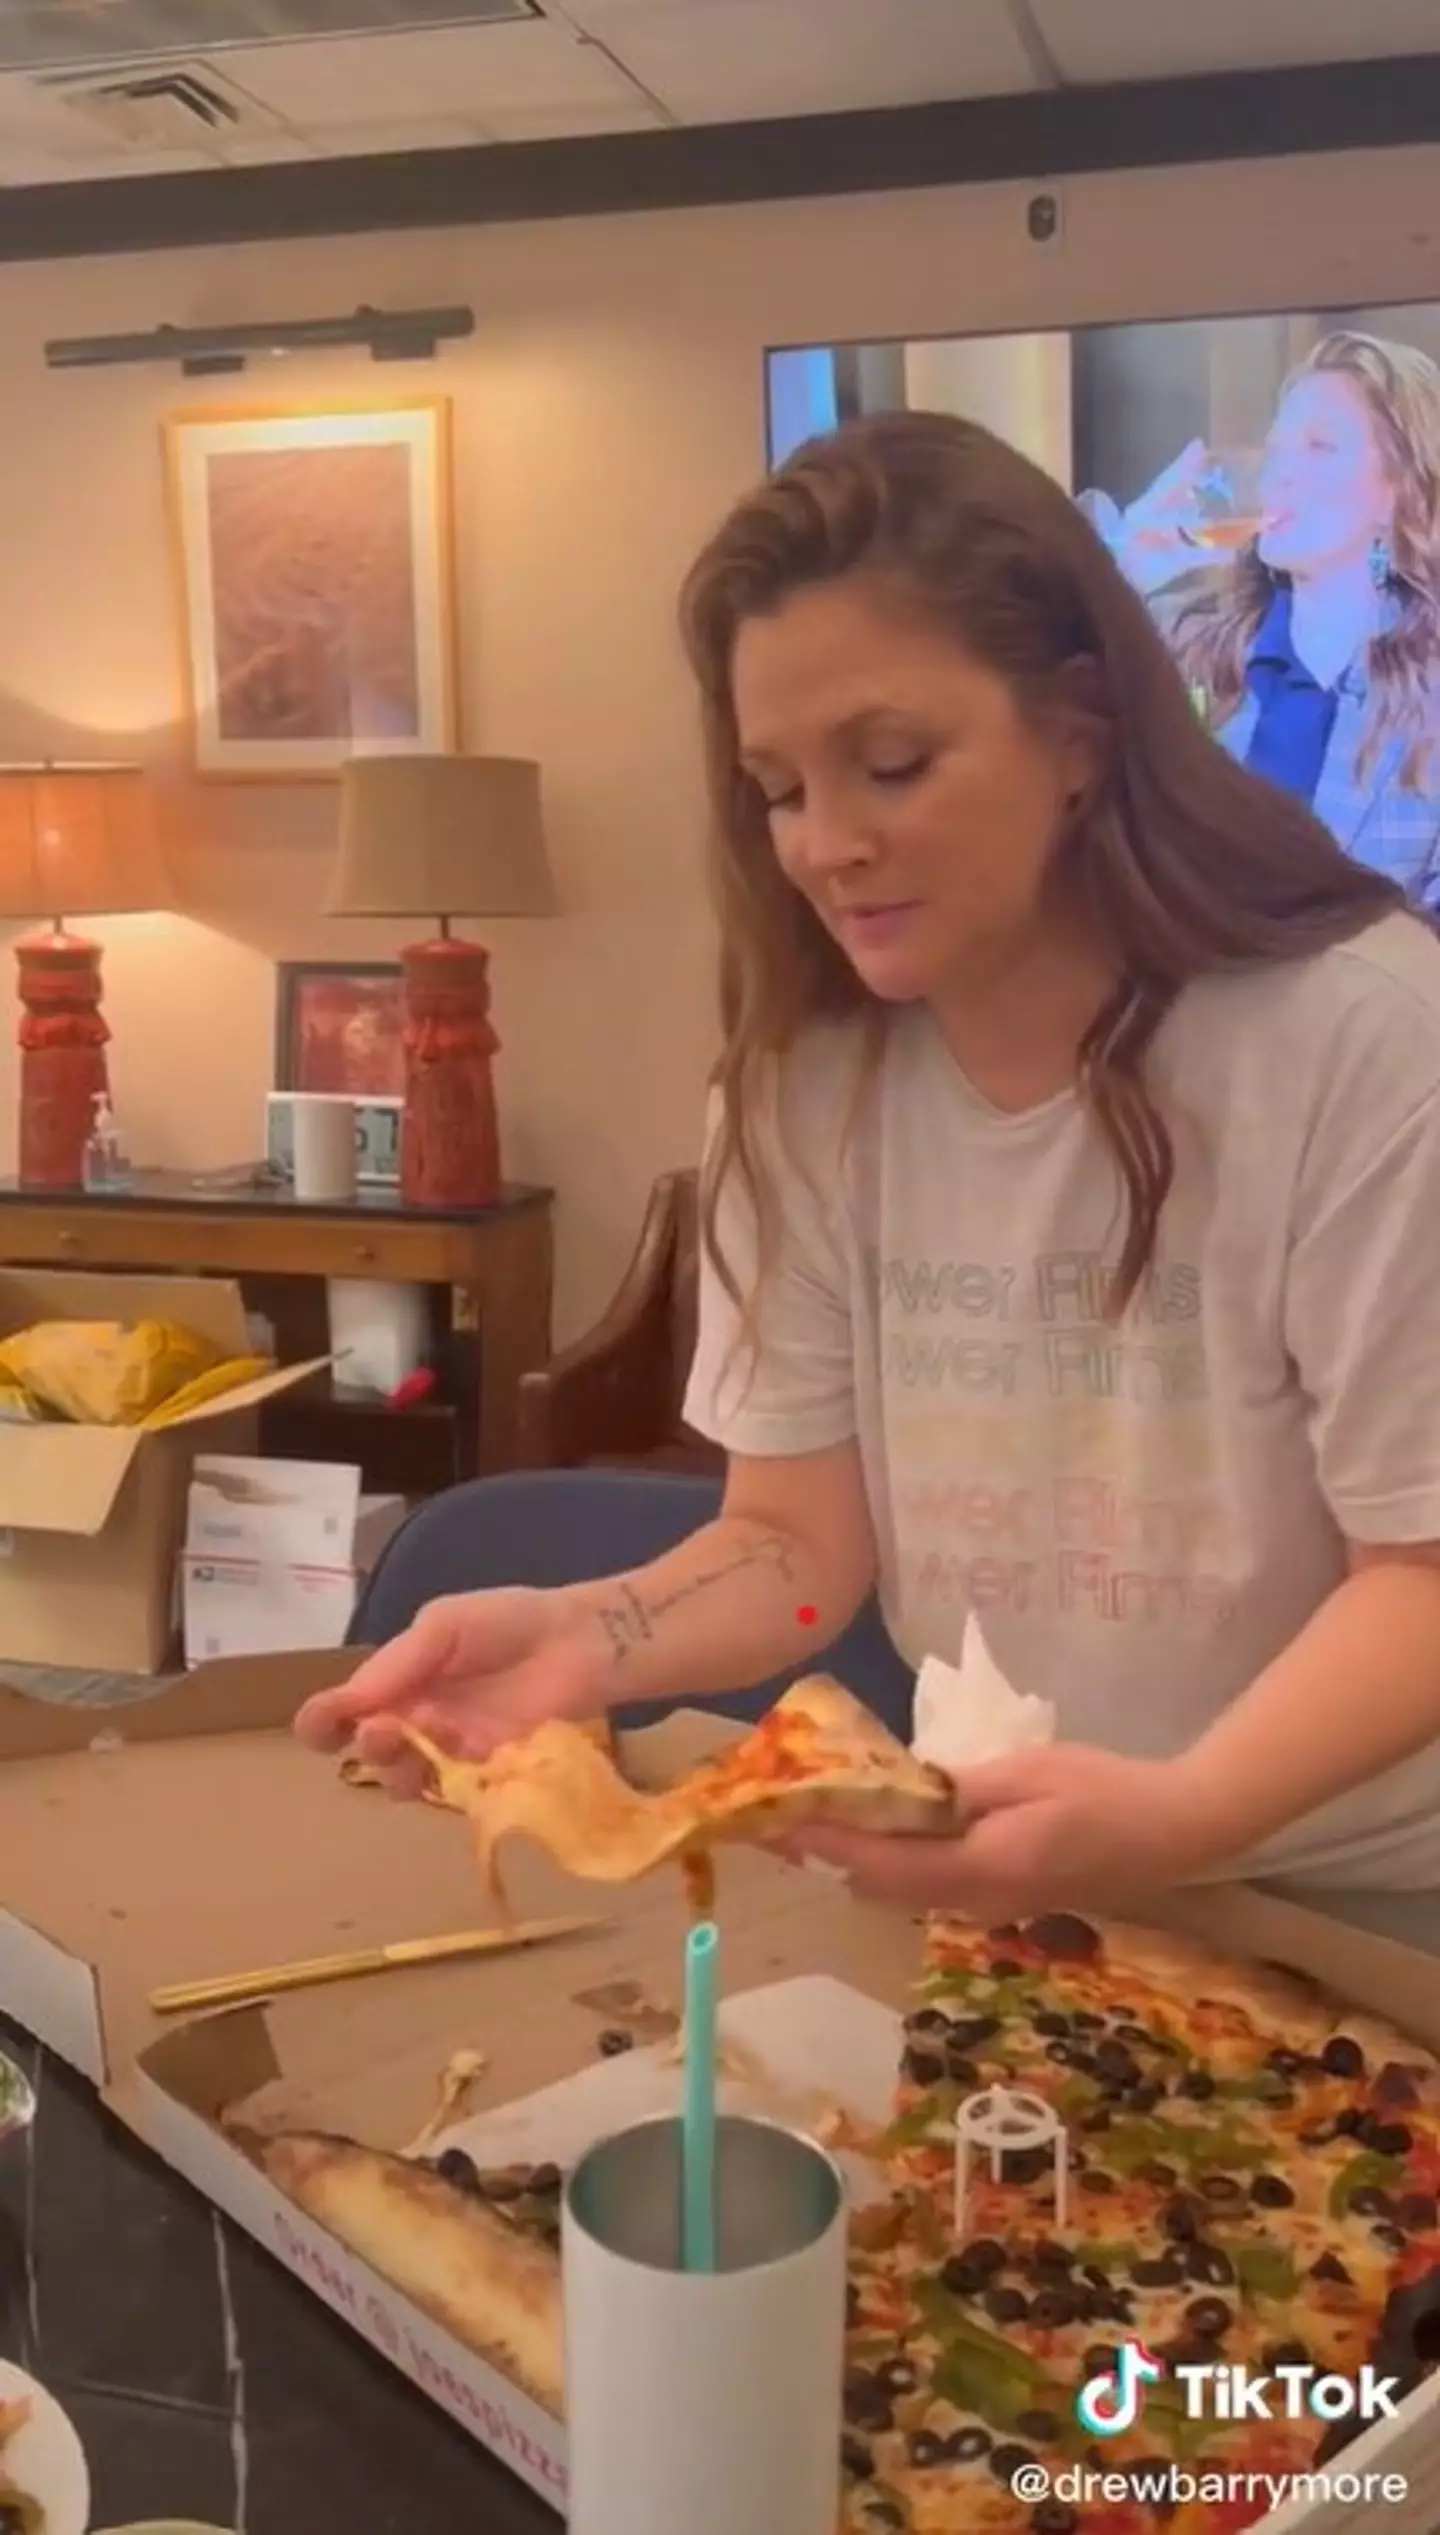 Drew Barrymore has fans divided with her pizza 'hack'.